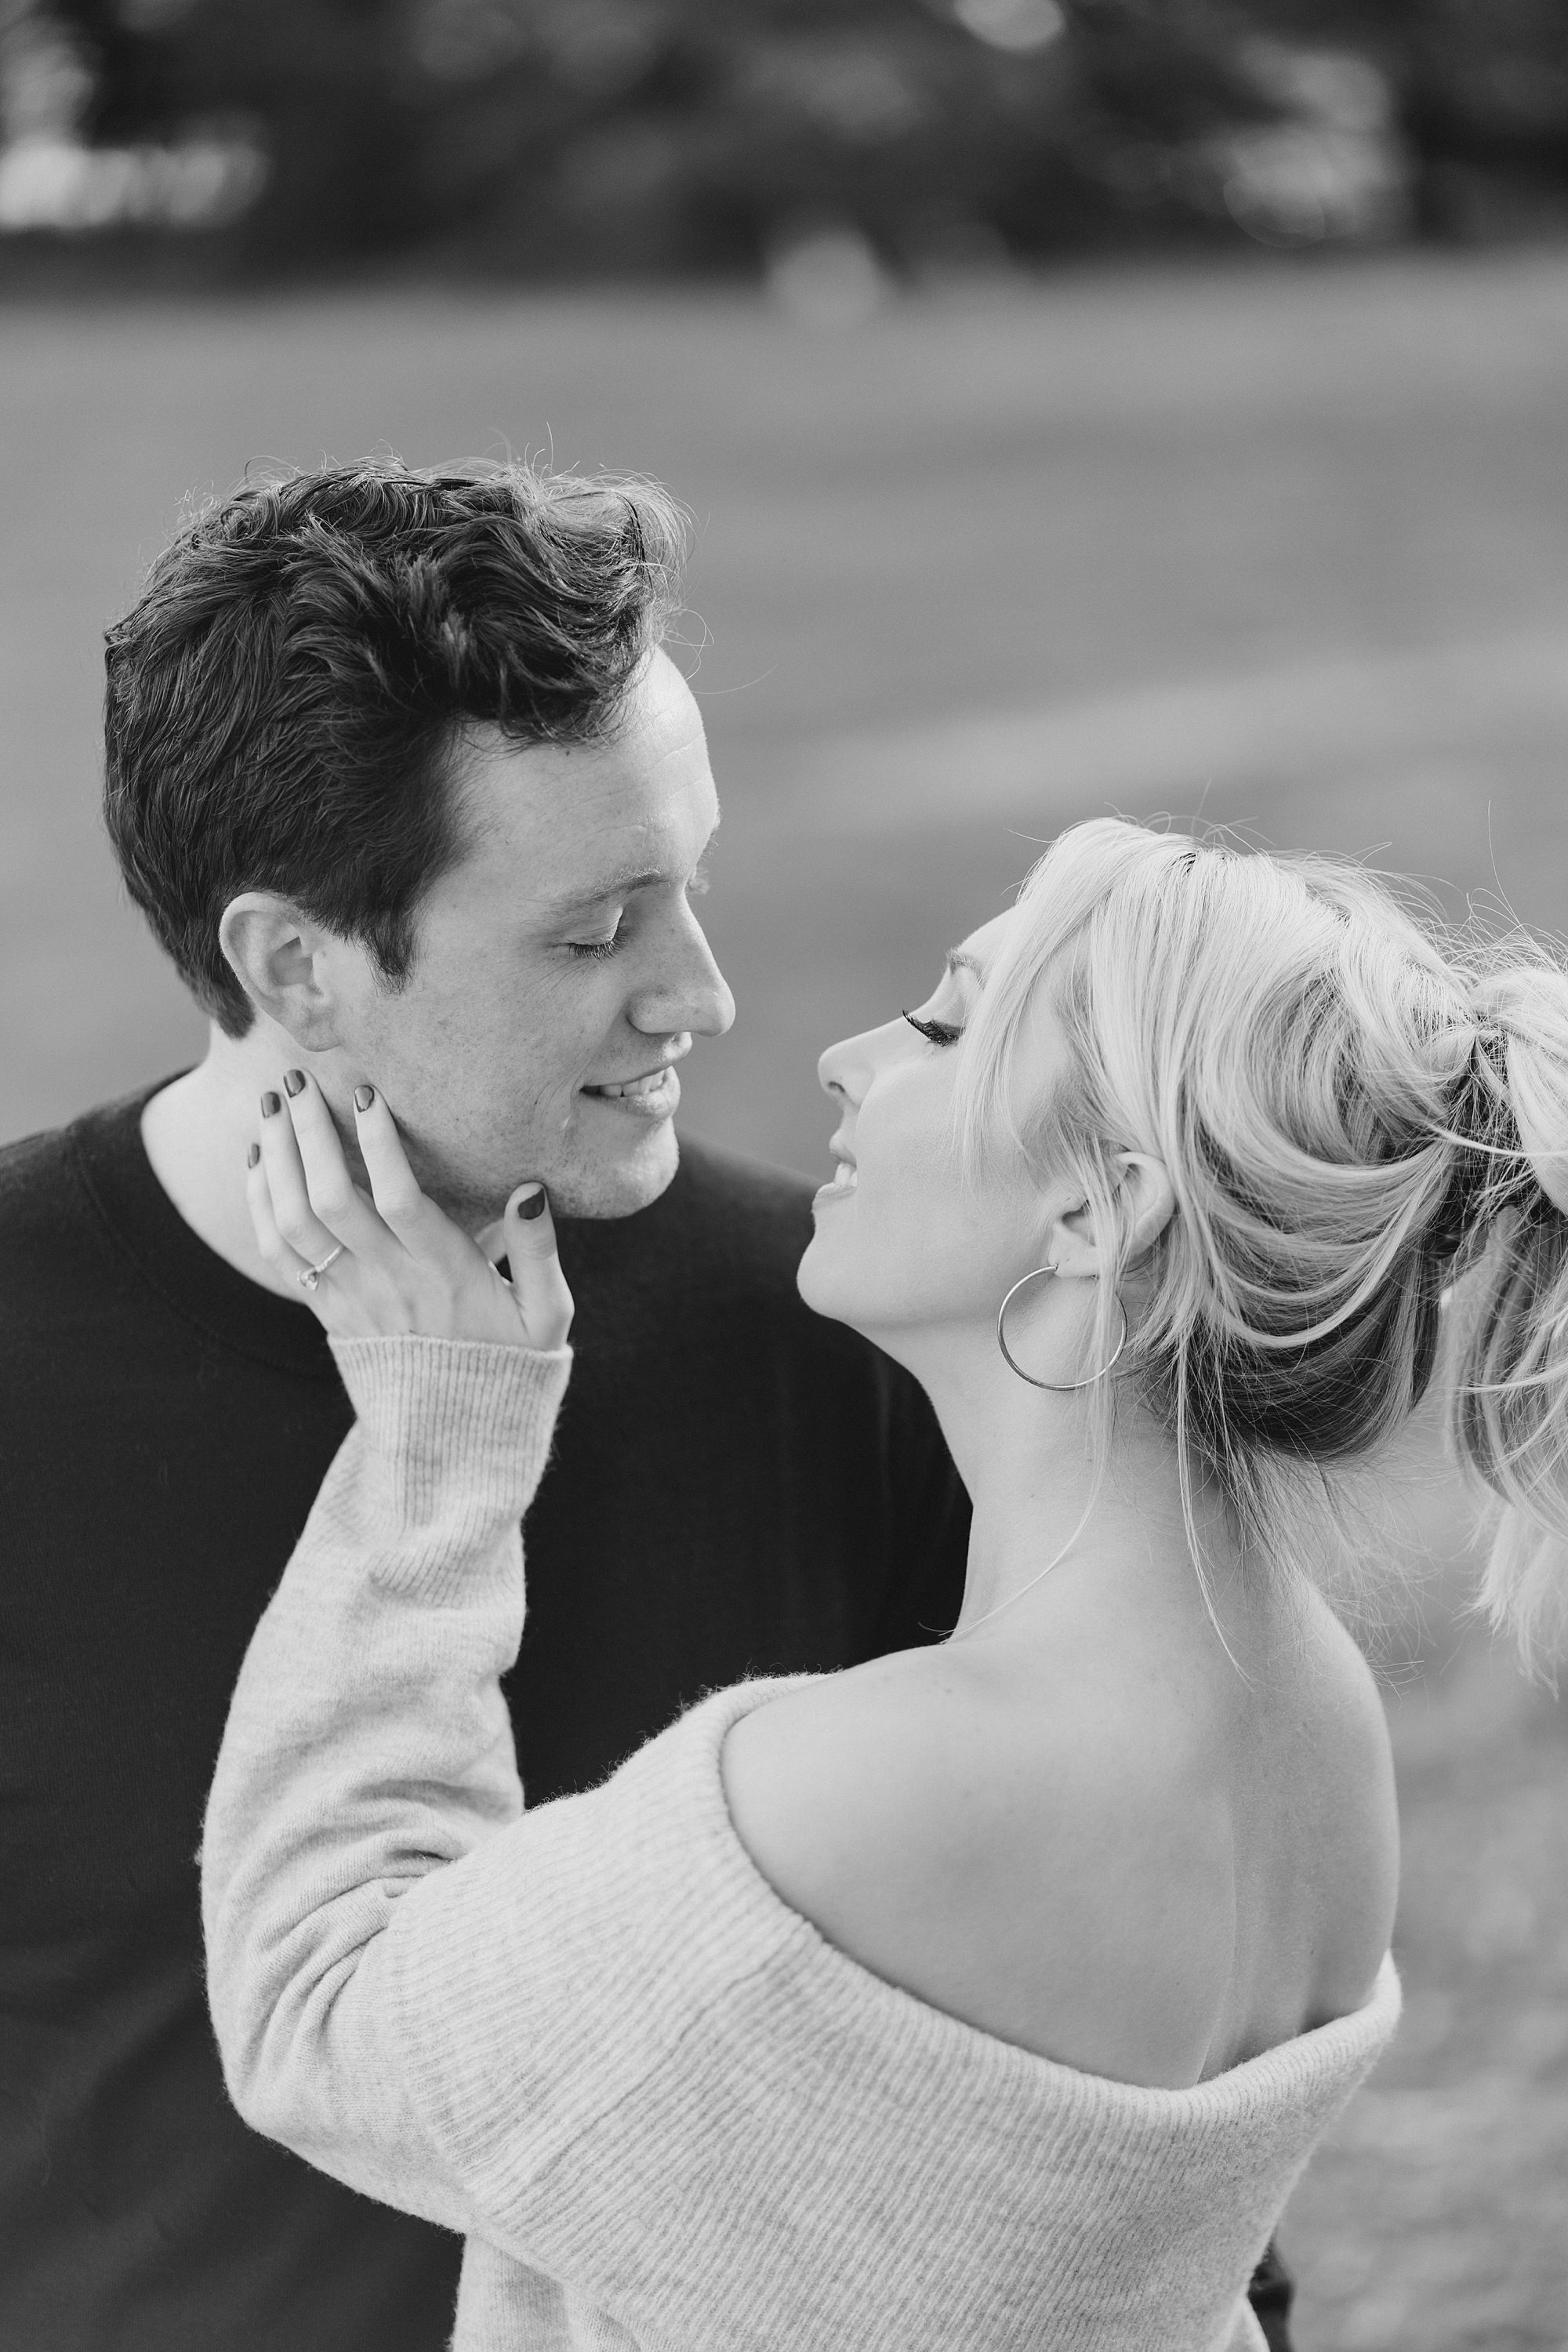 romantic images from couples engagement session